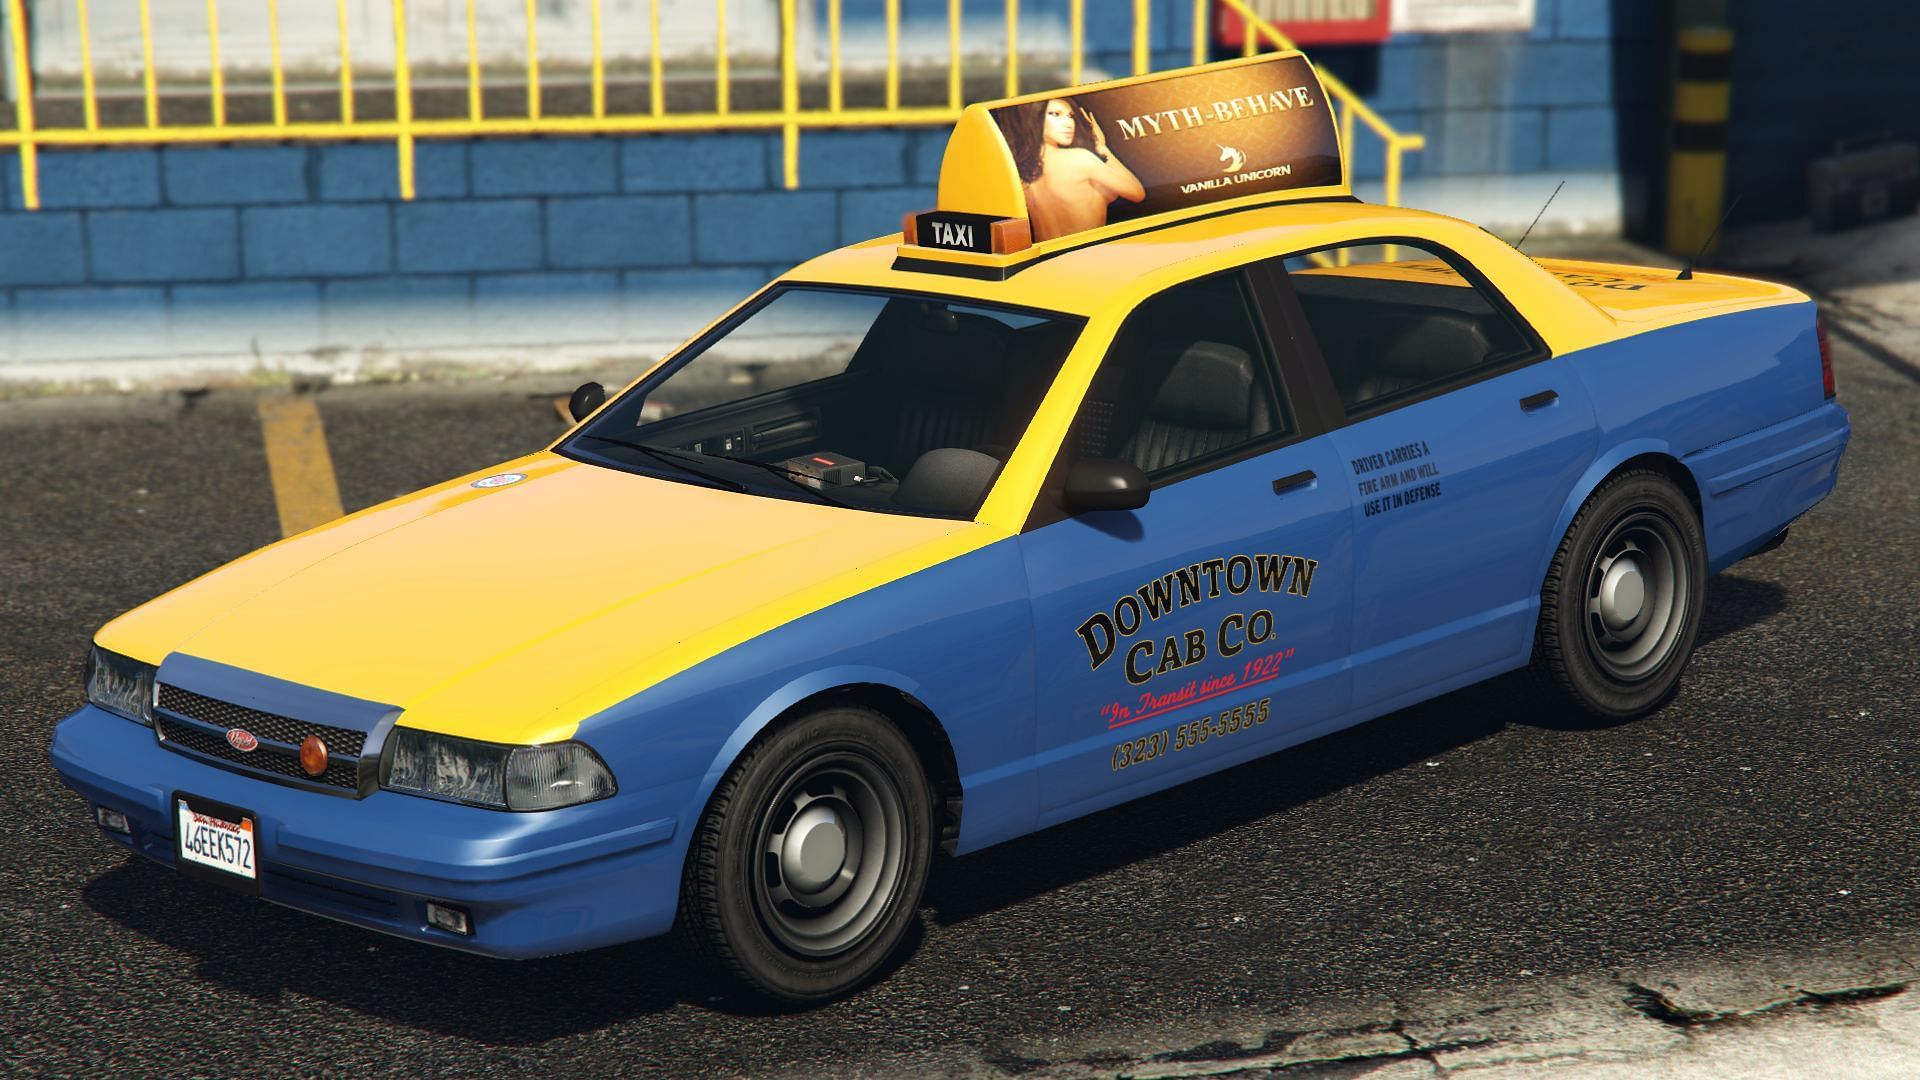 Taxi can be bought for a discounted price in GTA Online (Image via GTA Wiki)